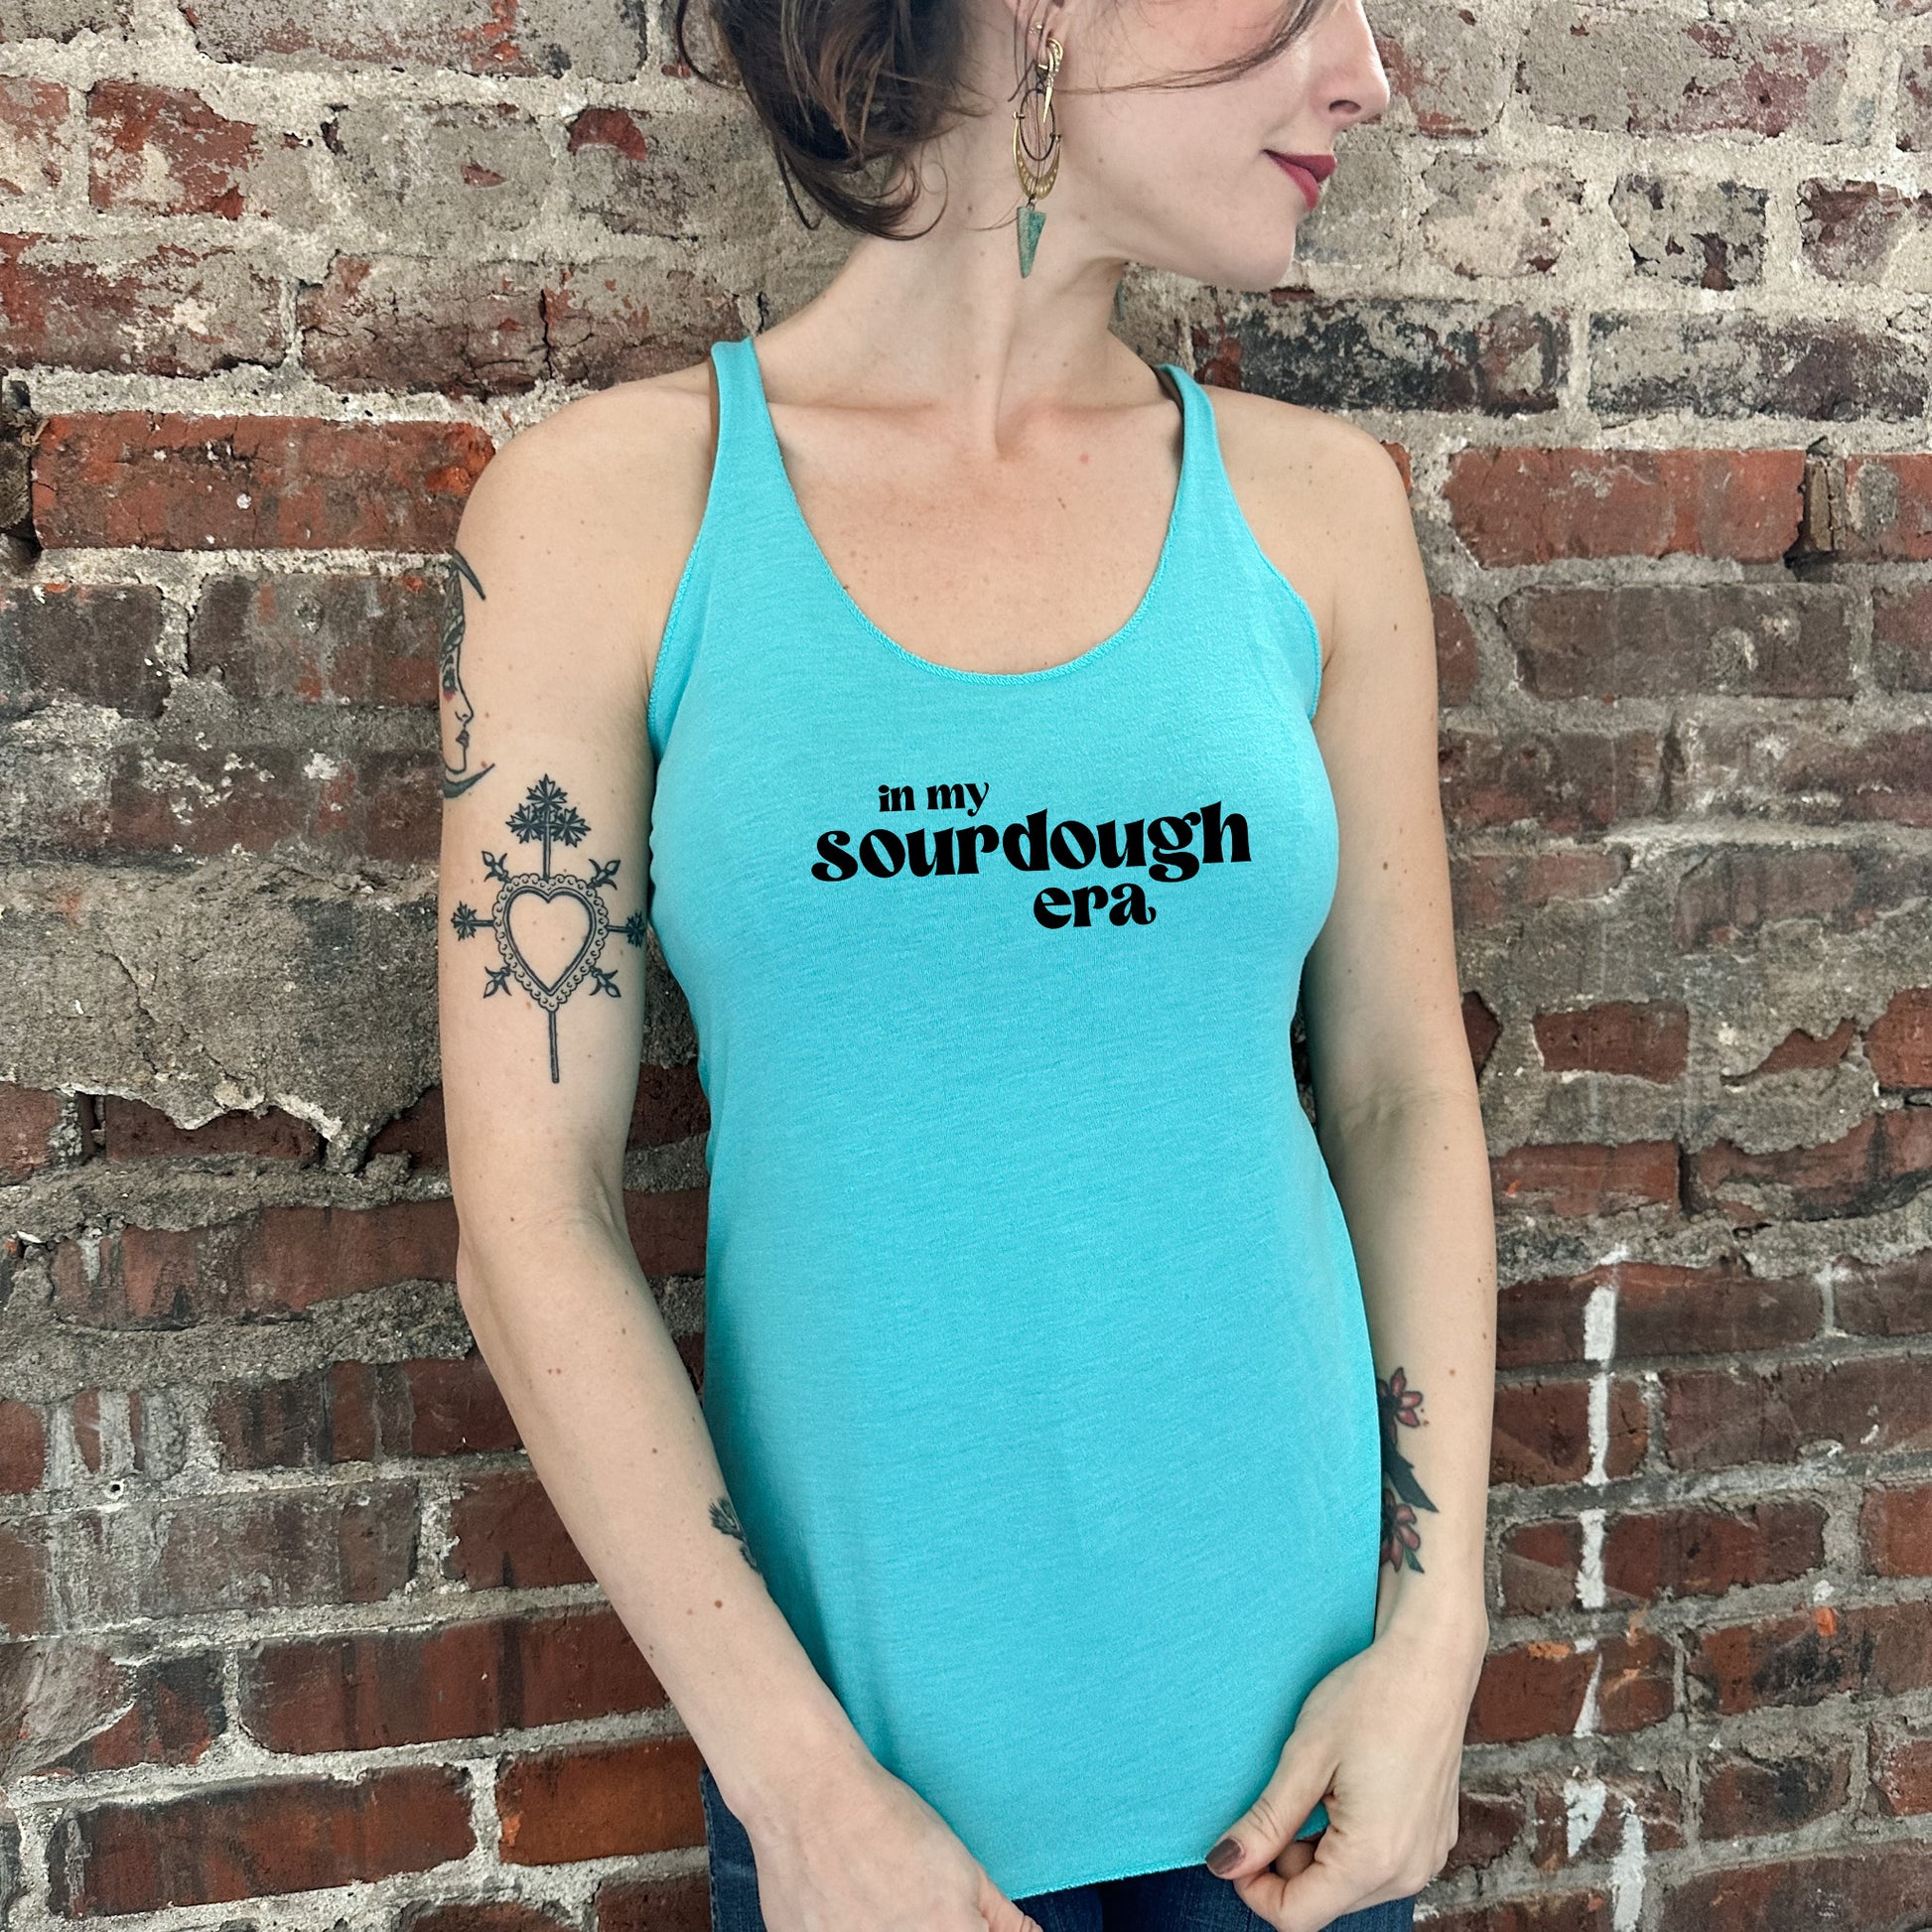 a woman wearing a blue tank top with a tattoo on her arm